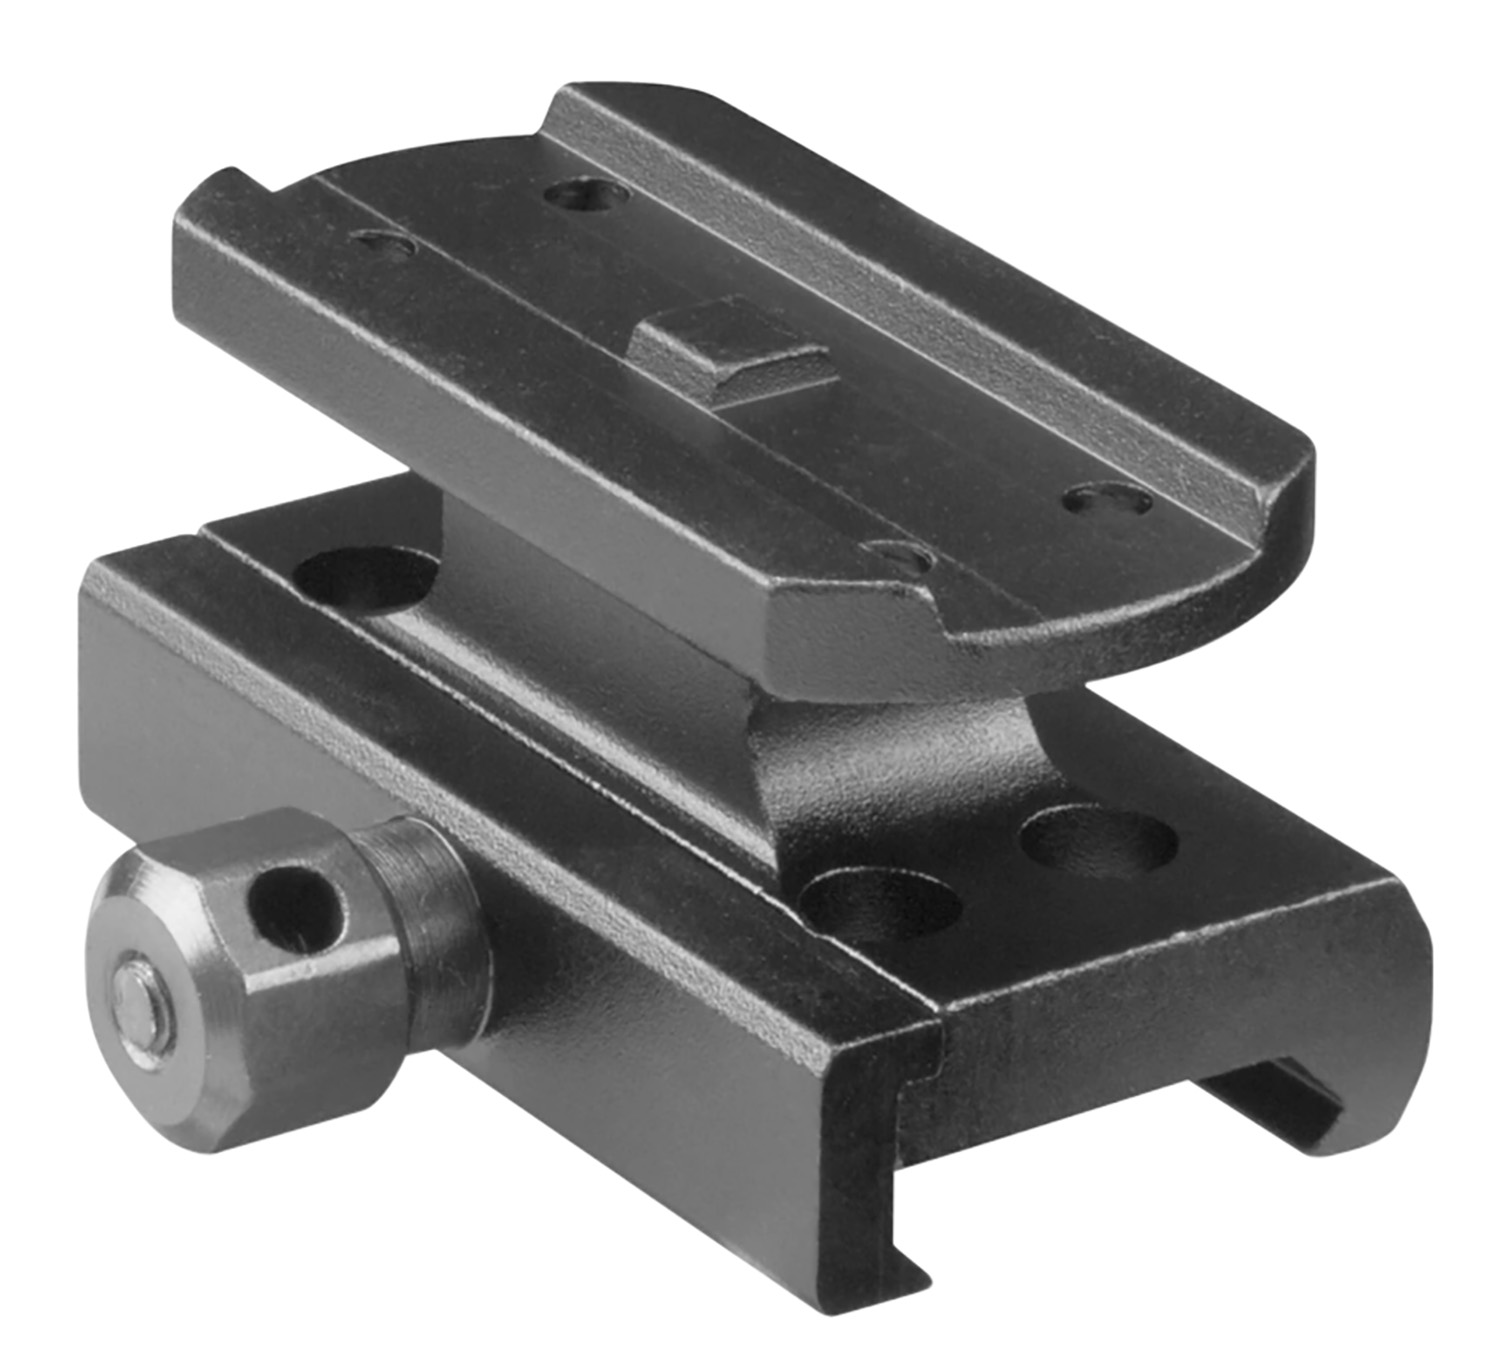 Aim Sports MT070 T1 Mount Absolute Co-Witness Black Anodized Aluminum